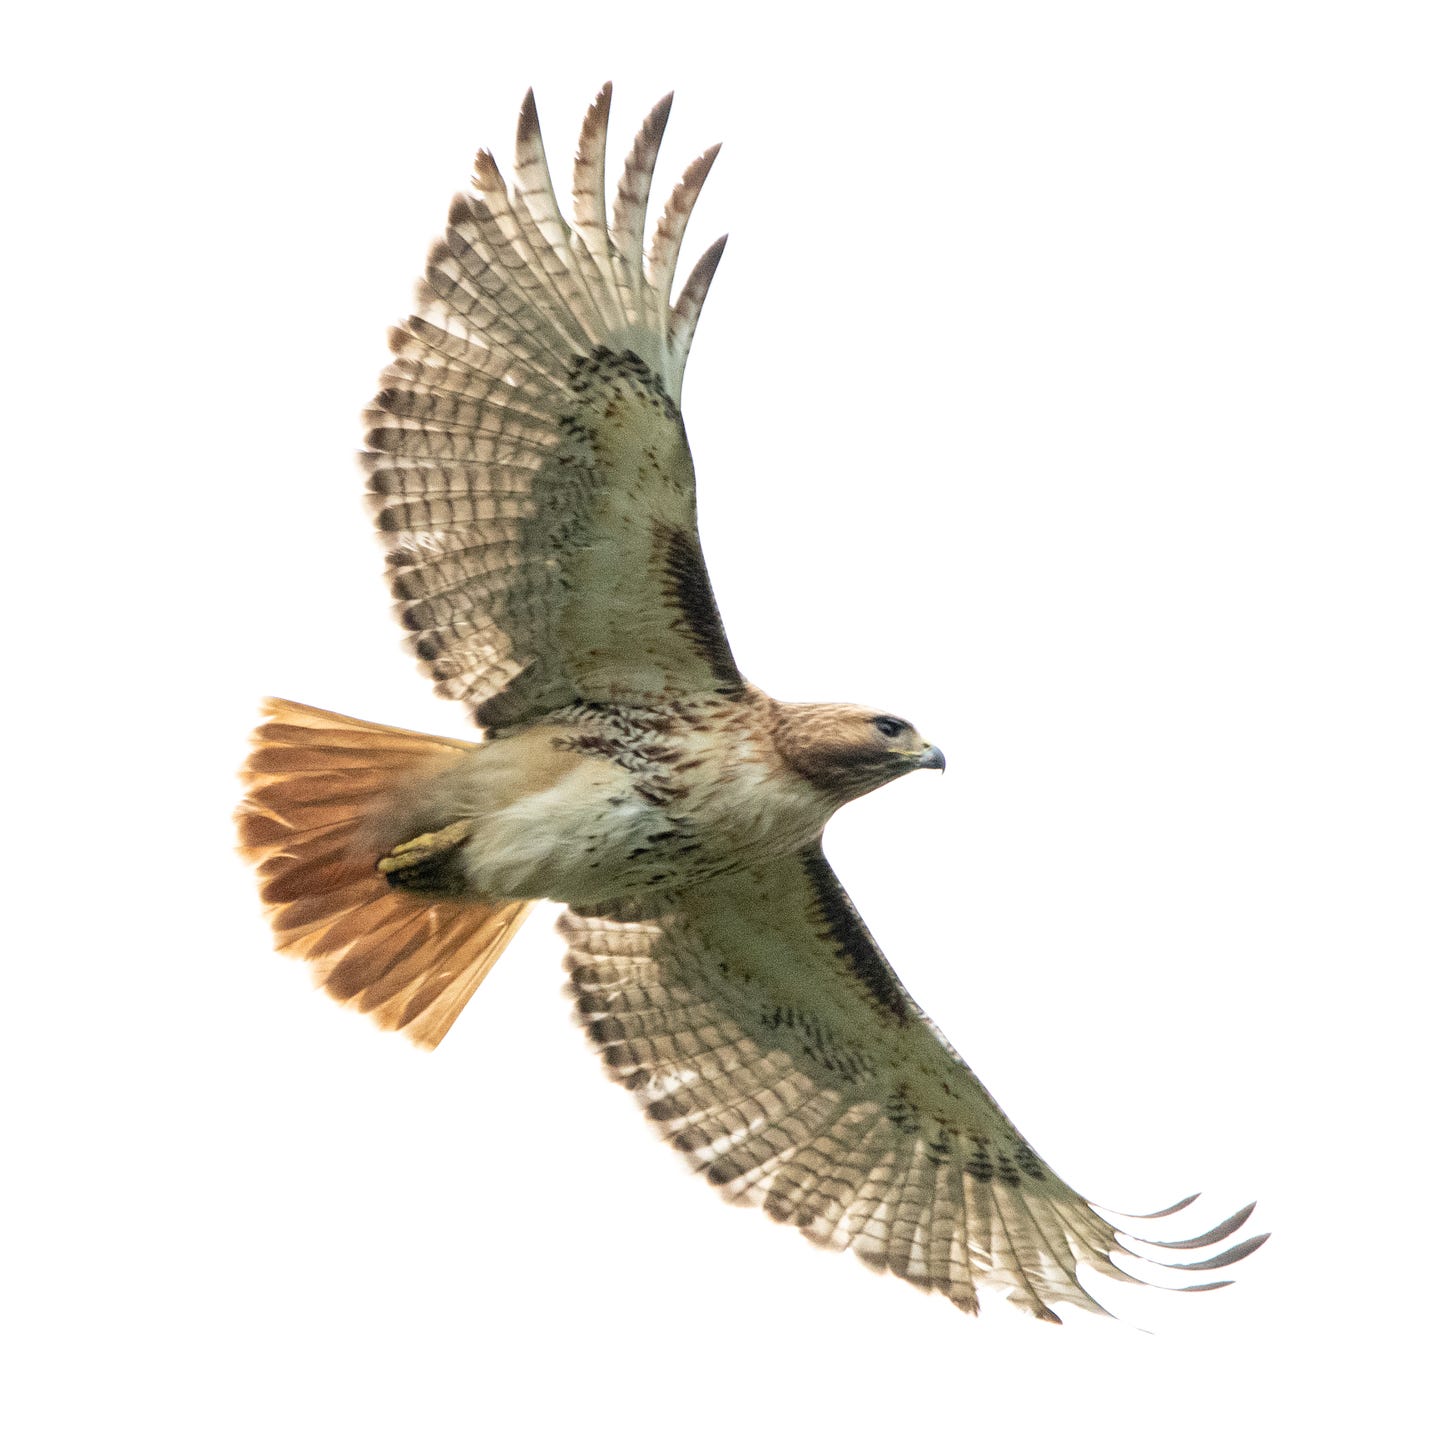 A red-tailed hawk in flight, its wings spread, and the feathers at the tips of its wings curling upward